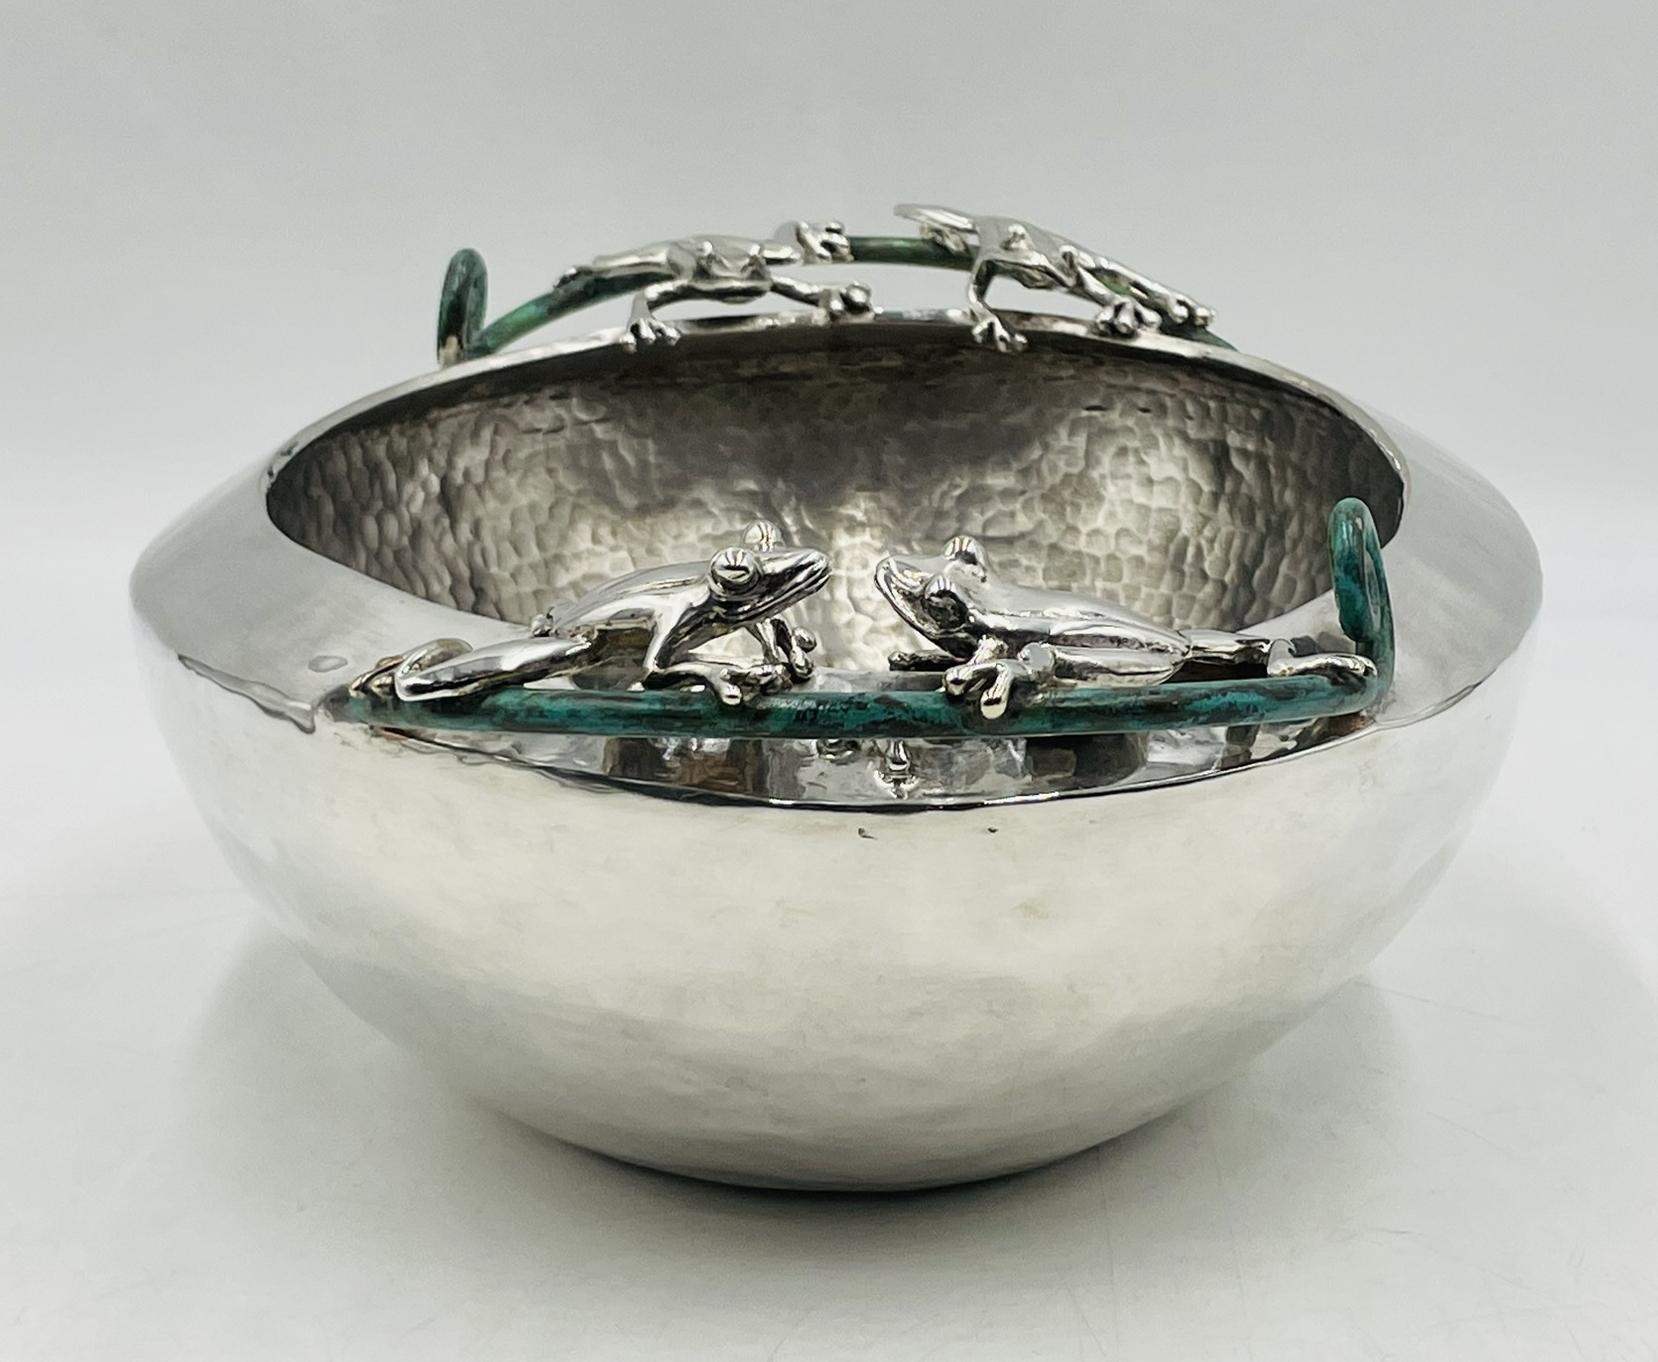 Modern Large Silver-Plated Bowl With Frogs Handles by Emilia Castillo, Mexico 21st Cent For Sale